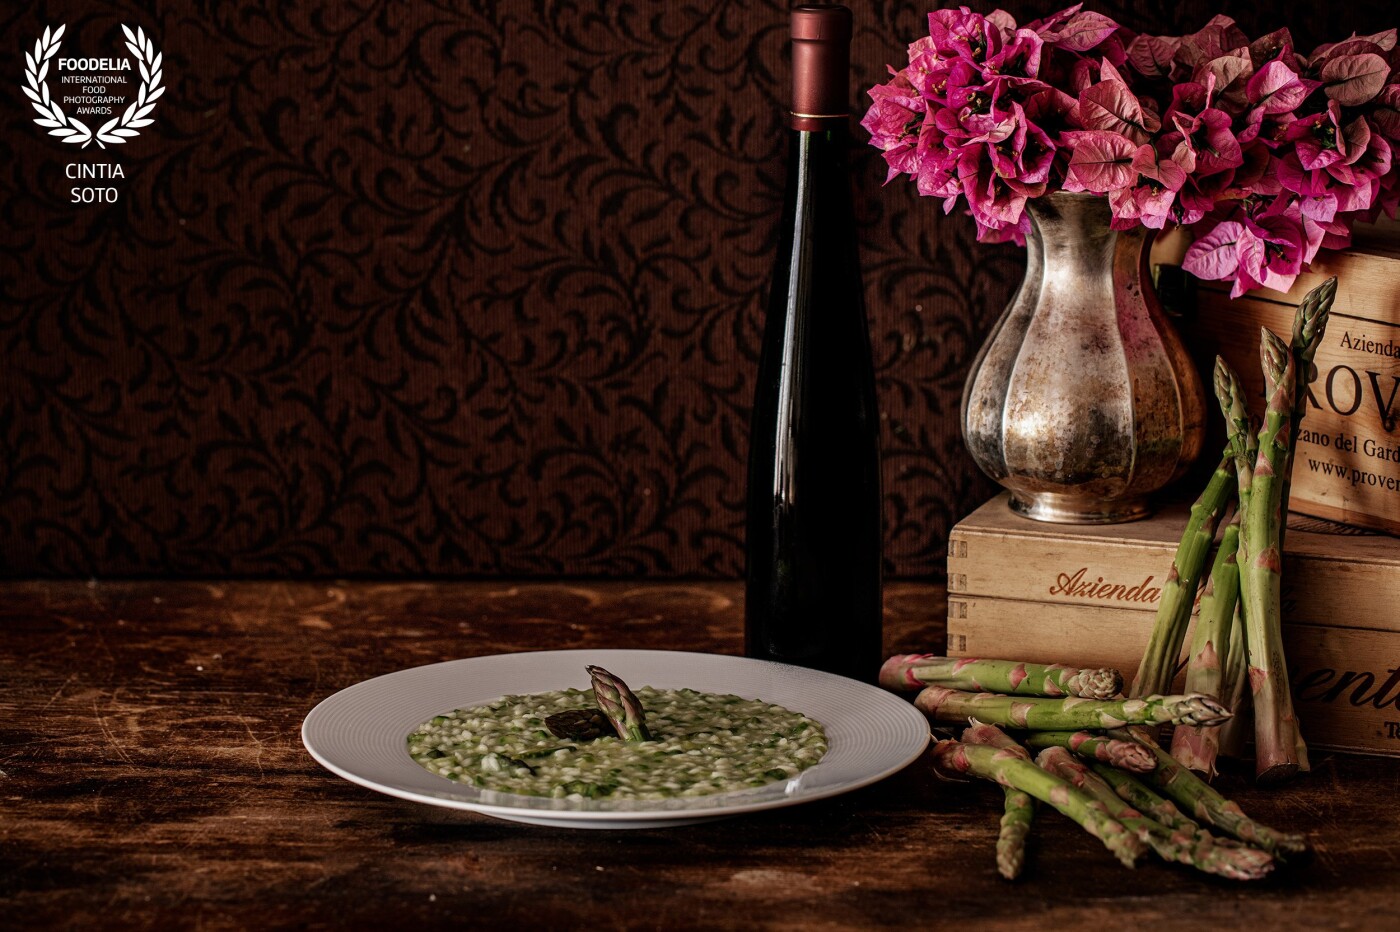 Asparagus risotto, simplicity of flavors, nothing better than paring with Lugana wine. Every time I visit Garda Lake in Italy I stop in a tiny restaurant of traditional cuisine from the lake, with amazing people they do everything from scratch. 